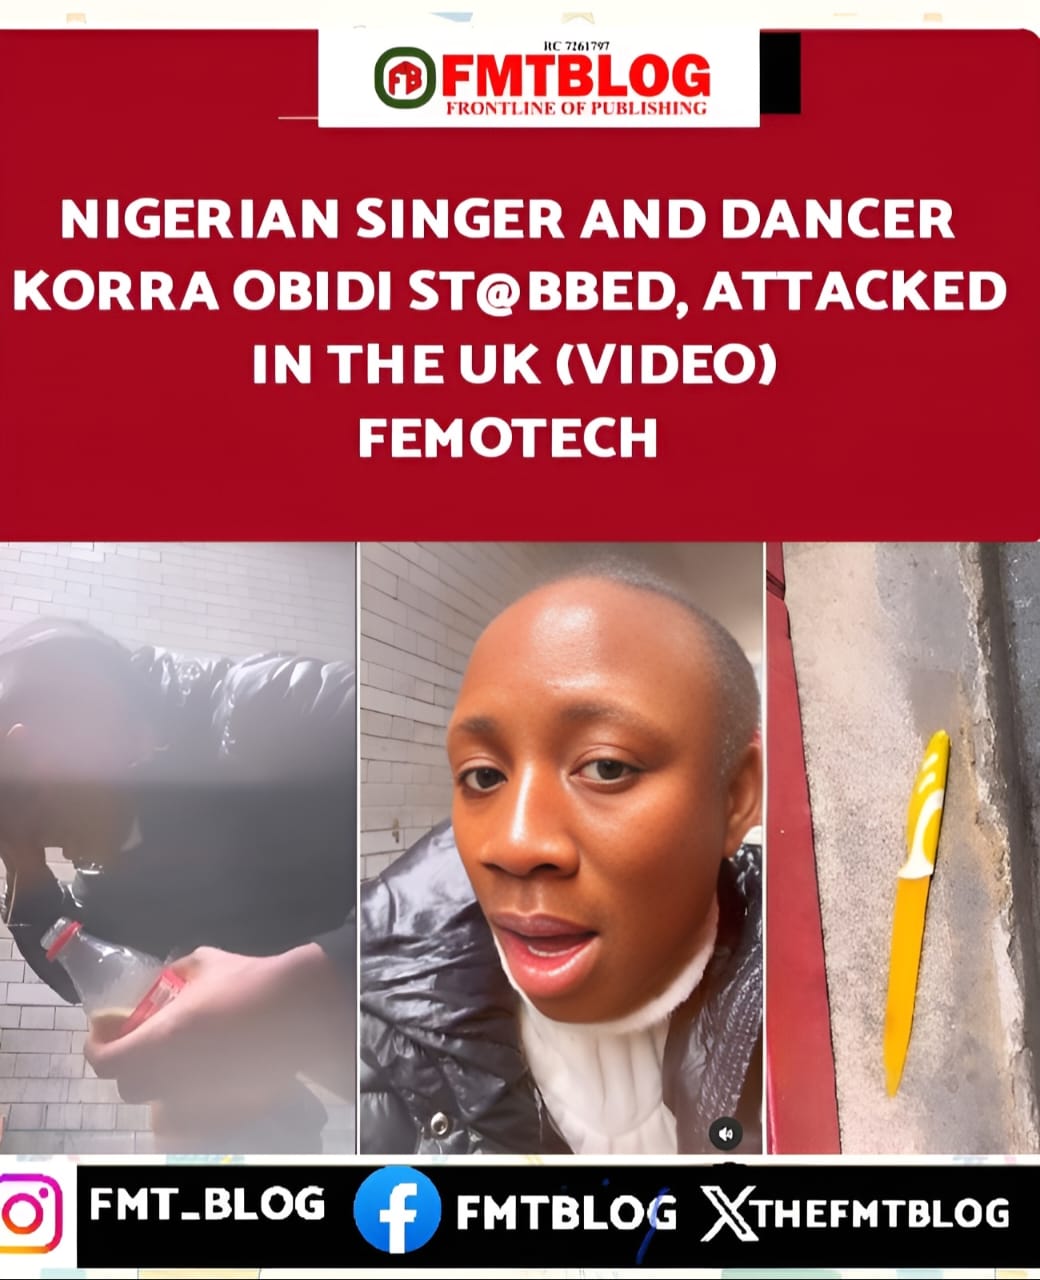 Nigerian Singer And Dancer Korra Obidi St@bbed, Attacked With Acid In The UK(VIDEO)